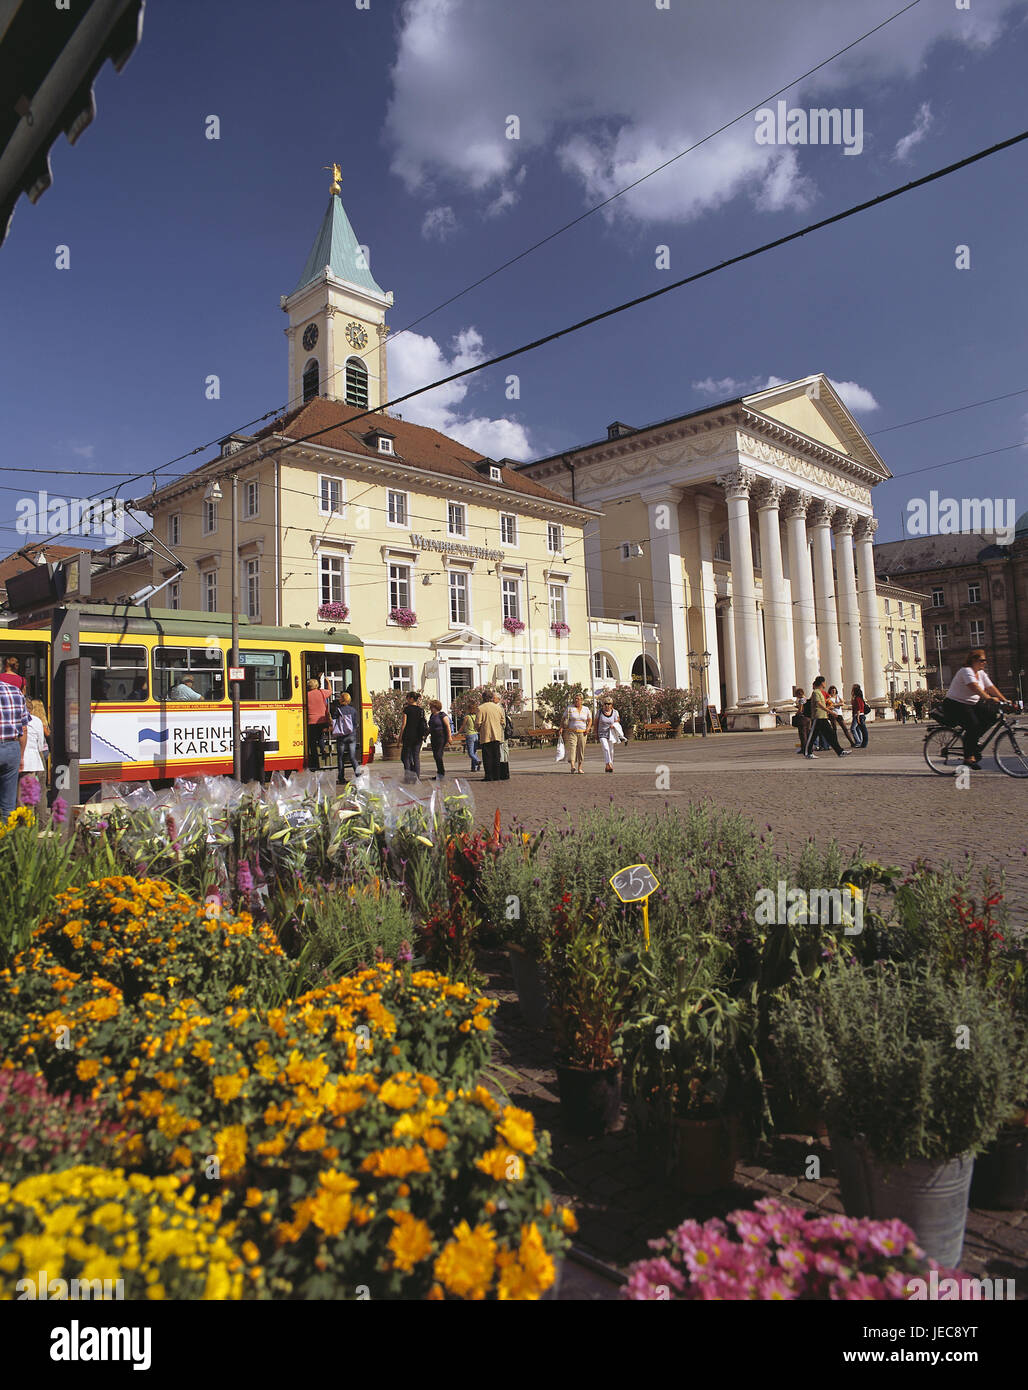 Germany, Baden-Wurttemberg, Karlsruhe, marketplace, wine programmer house, Protestant town church, town, centre, square, building, church, facades, market, flowers, market stall, flower sales, passer-by, city railroad, streetcar, stop, person, Stock Photo